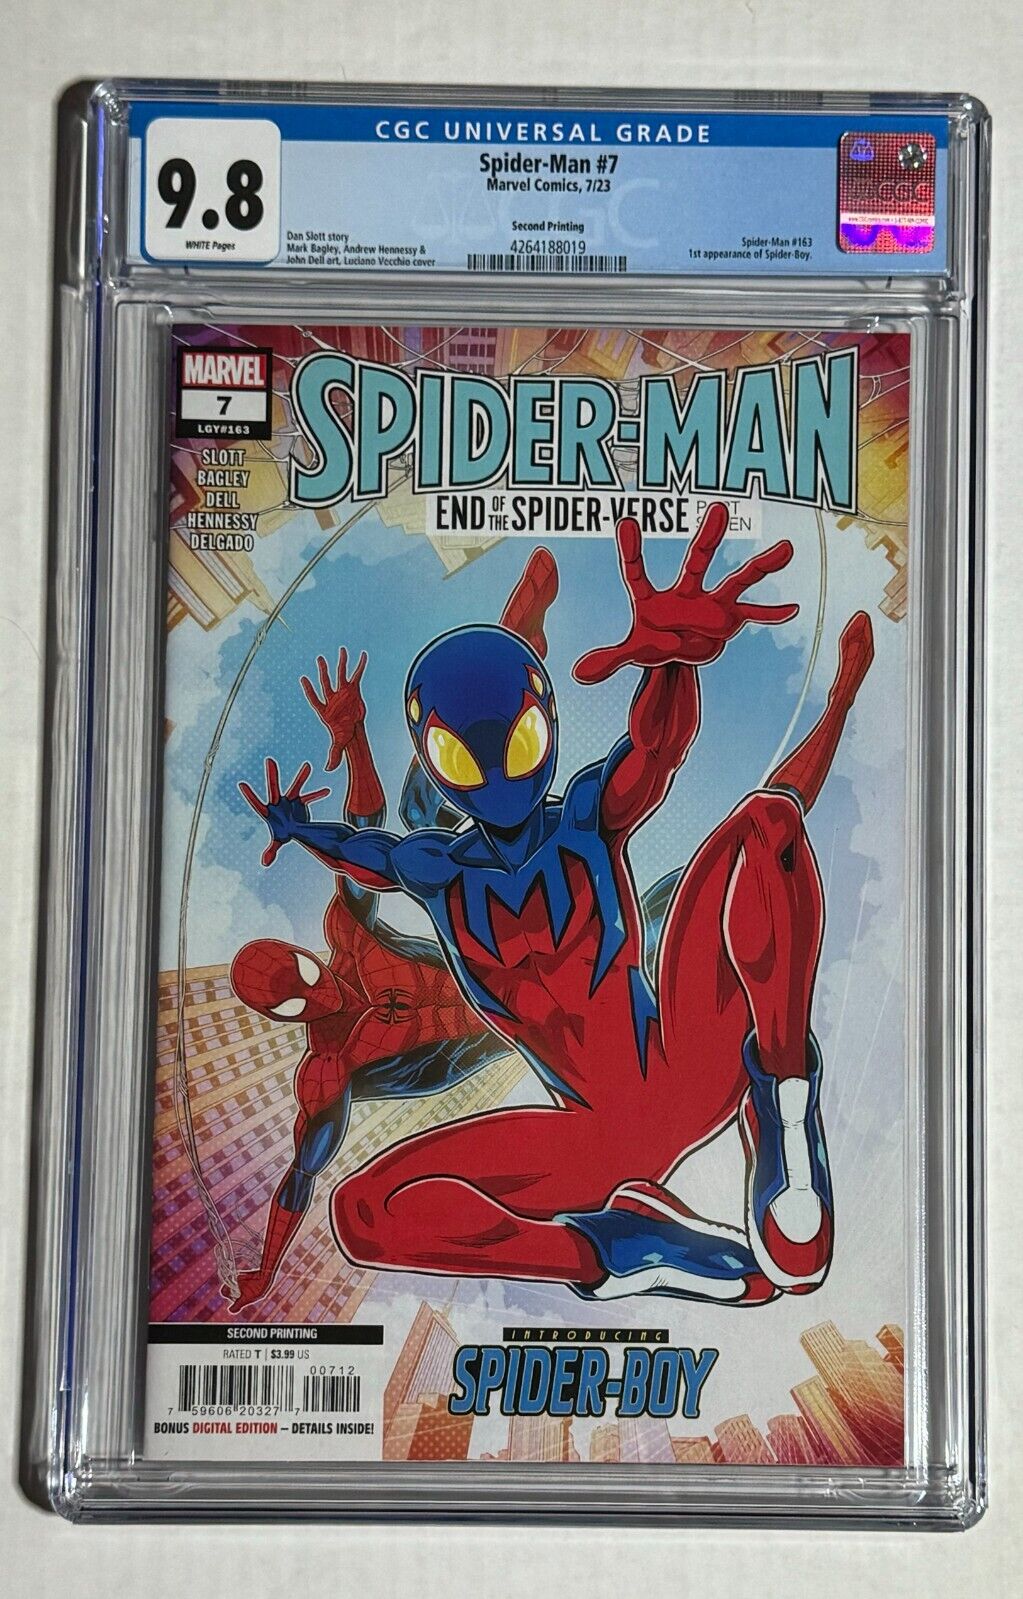 Spider-Man #7 CGC 9.8 Second Print - First Appearance of Spider-Boy